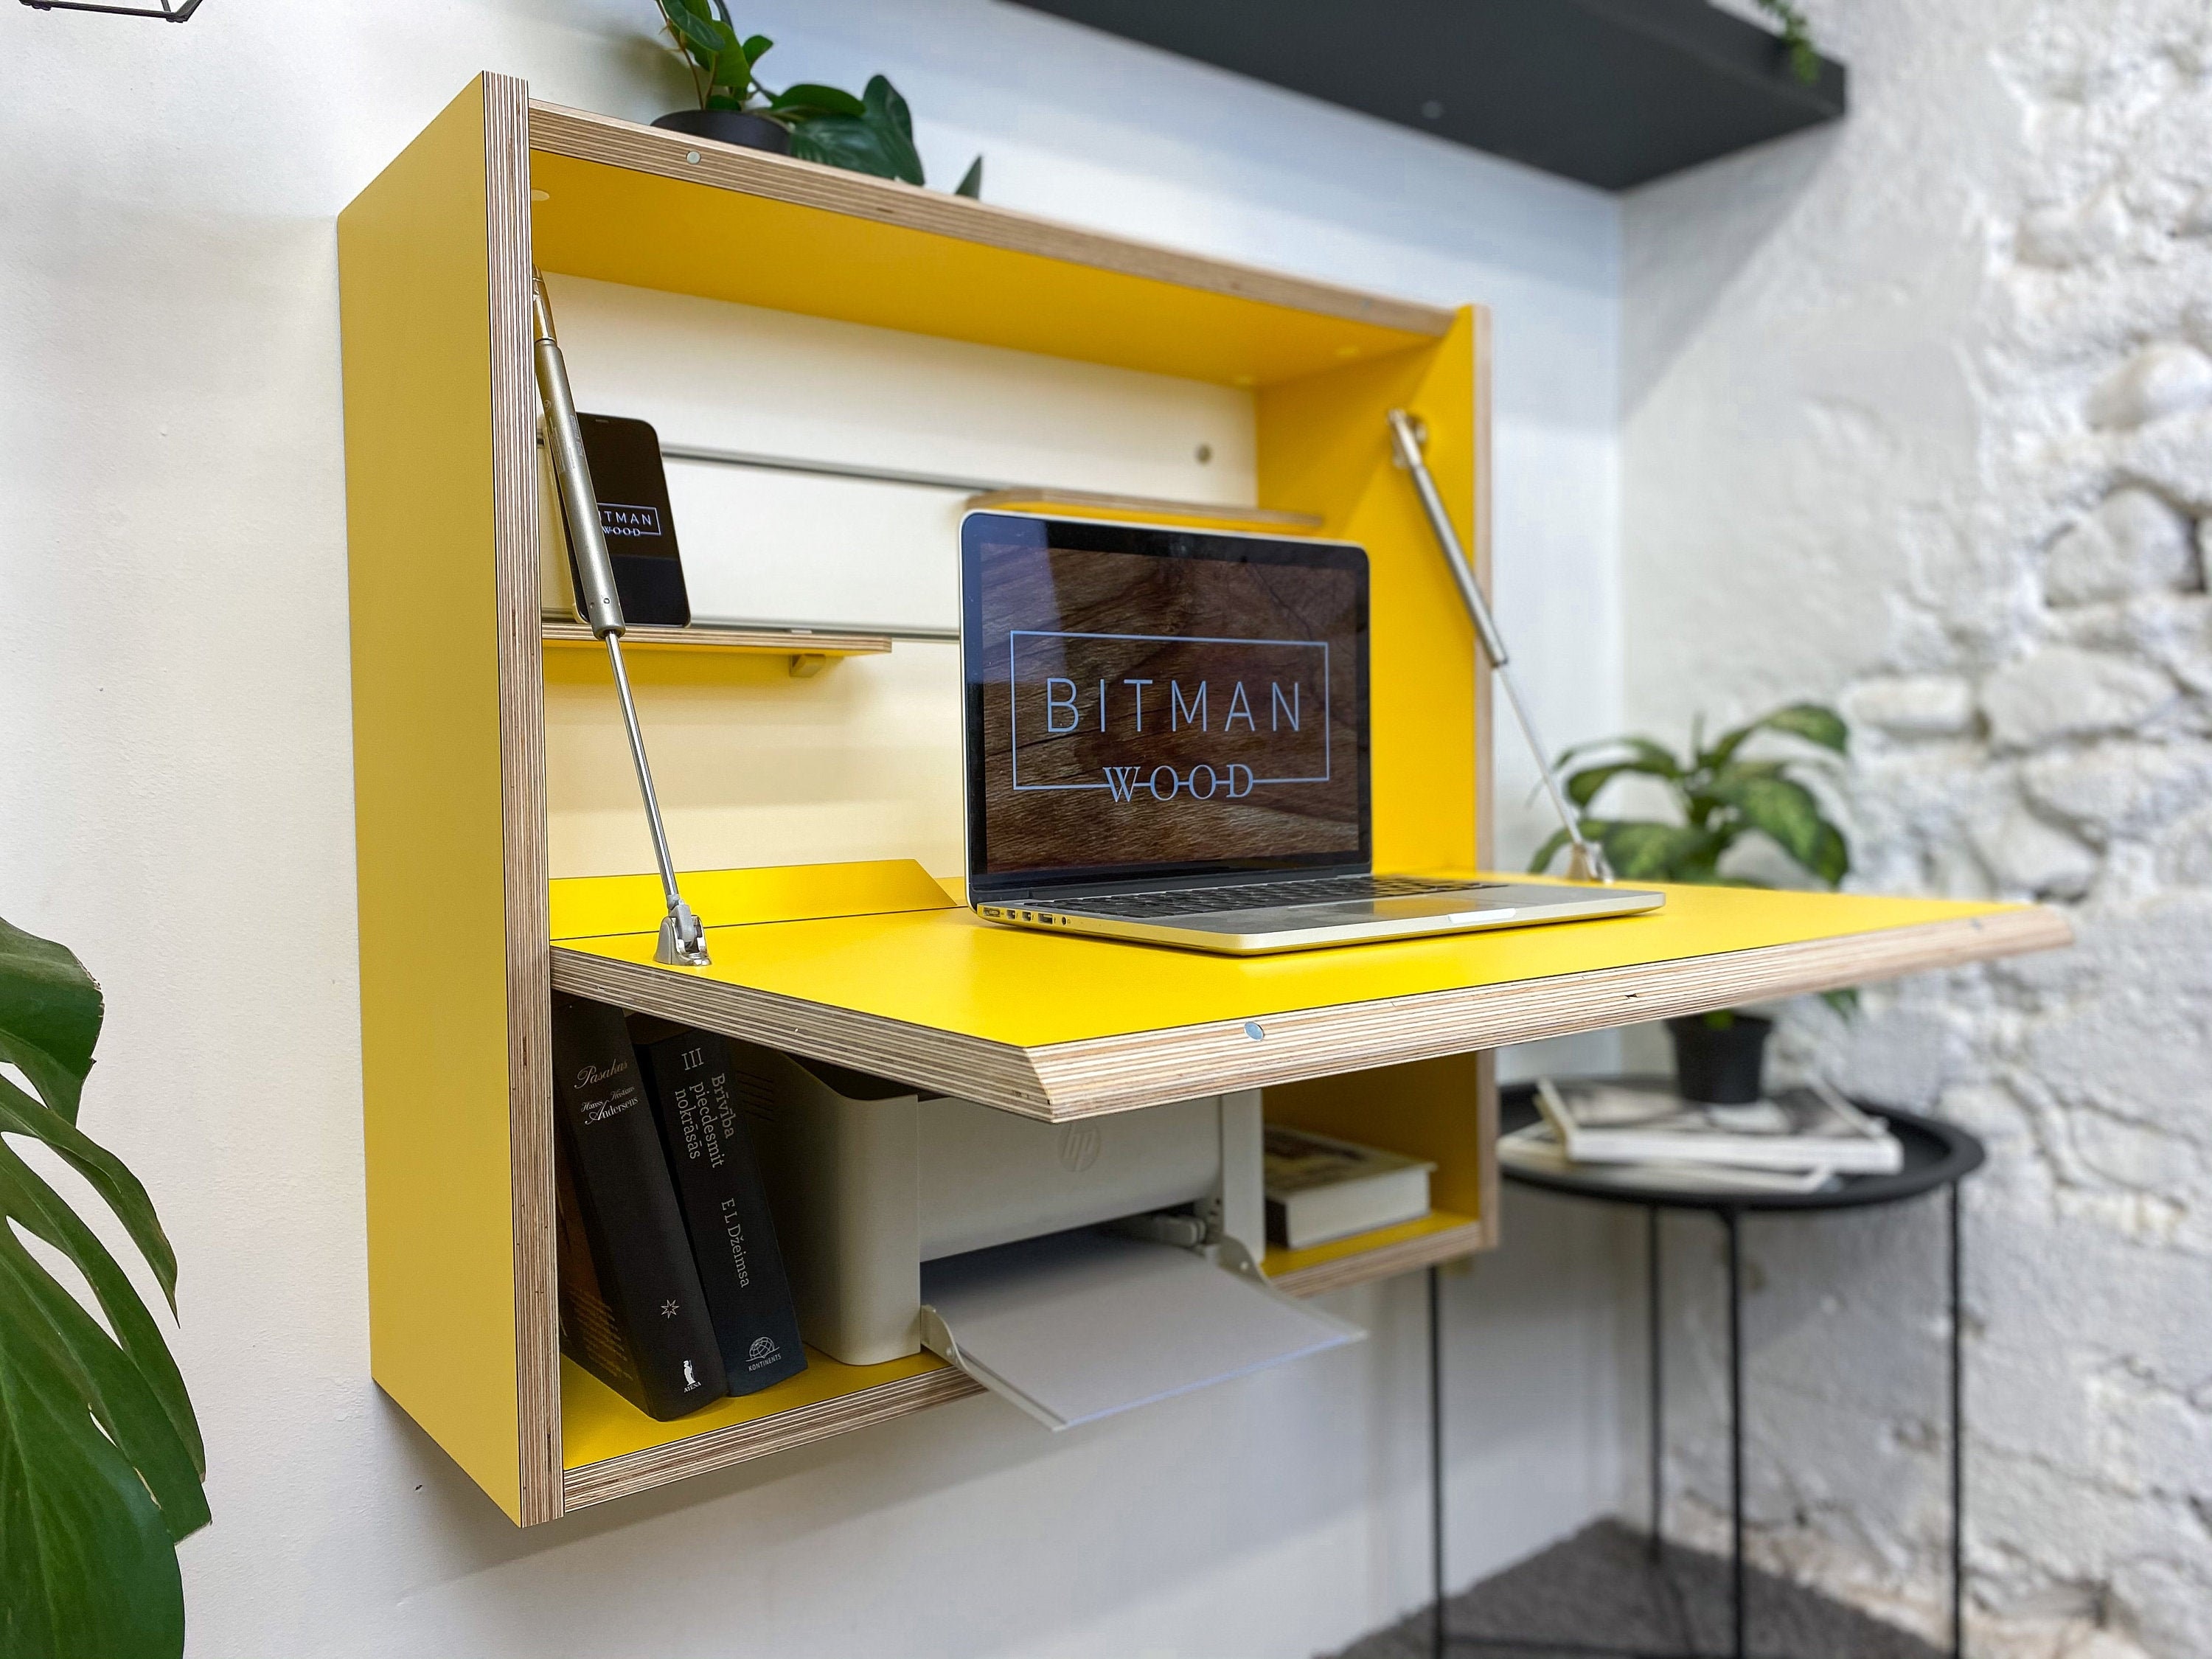 Ten Space-Saving Desks That Work Great in Small Living Spaces - Living in a  shoebox